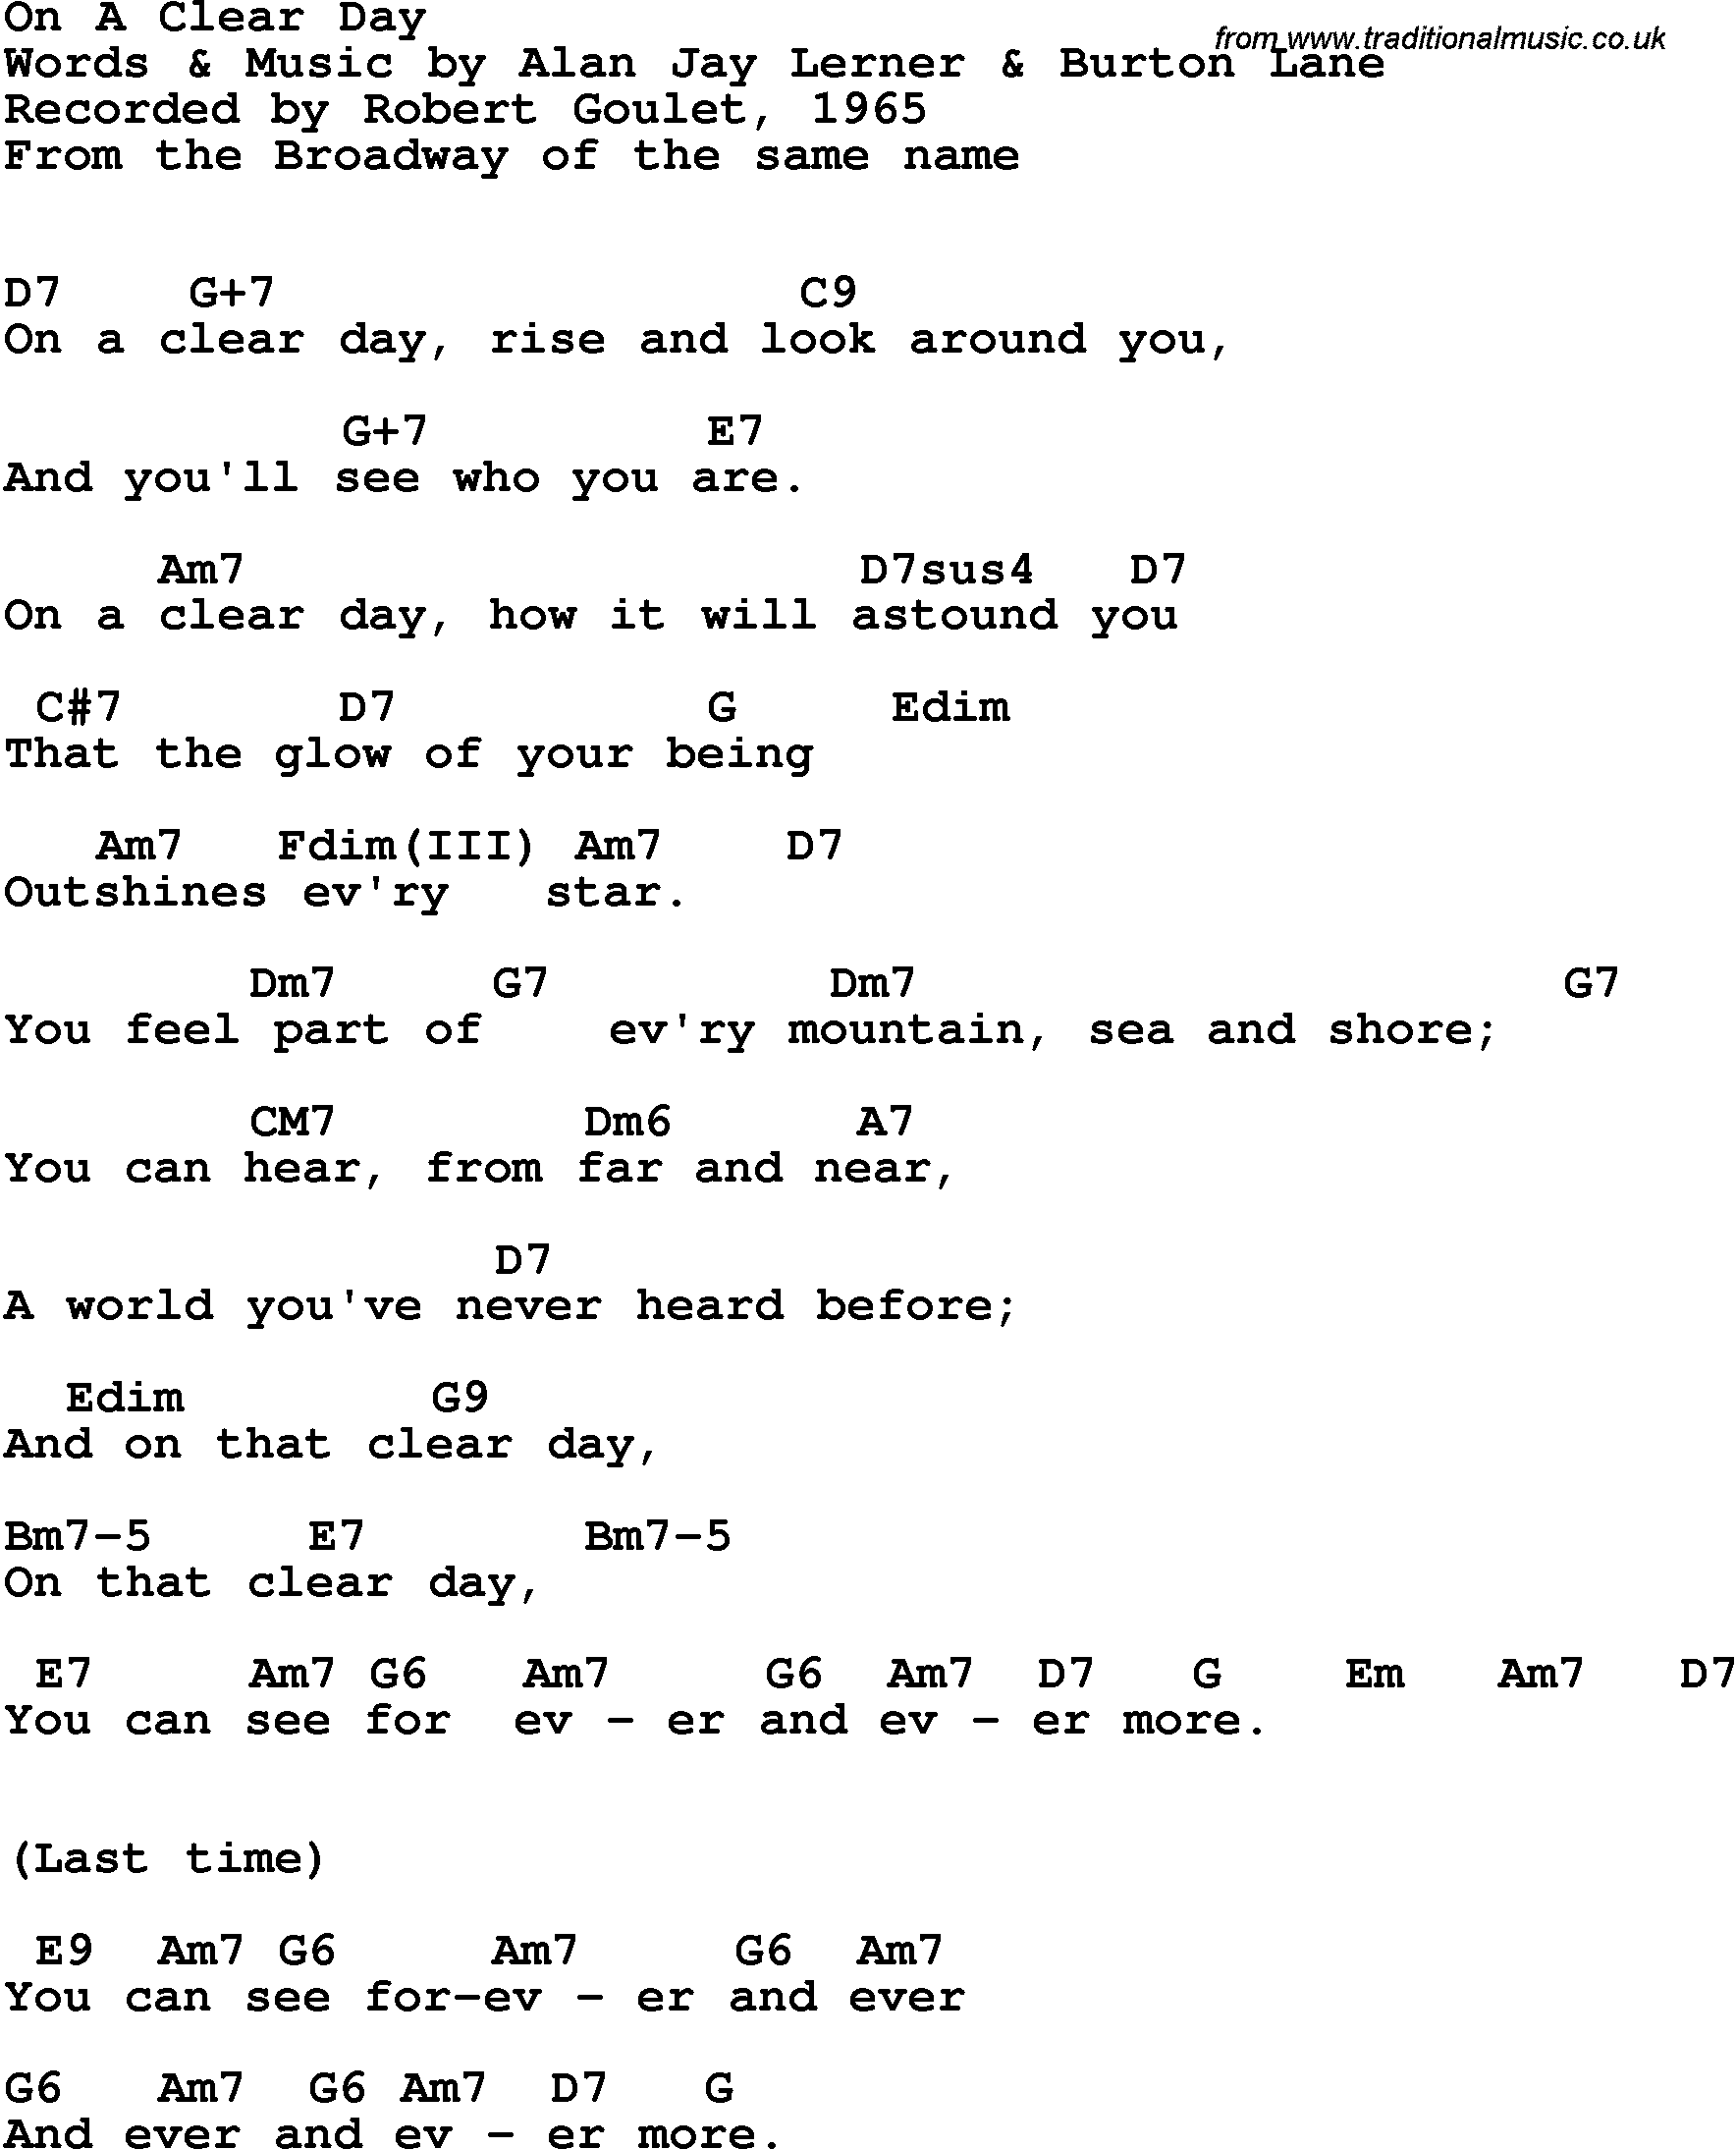 Song Lyrics with guitar chords for On A Clear Day - Robert Goulet, 1965